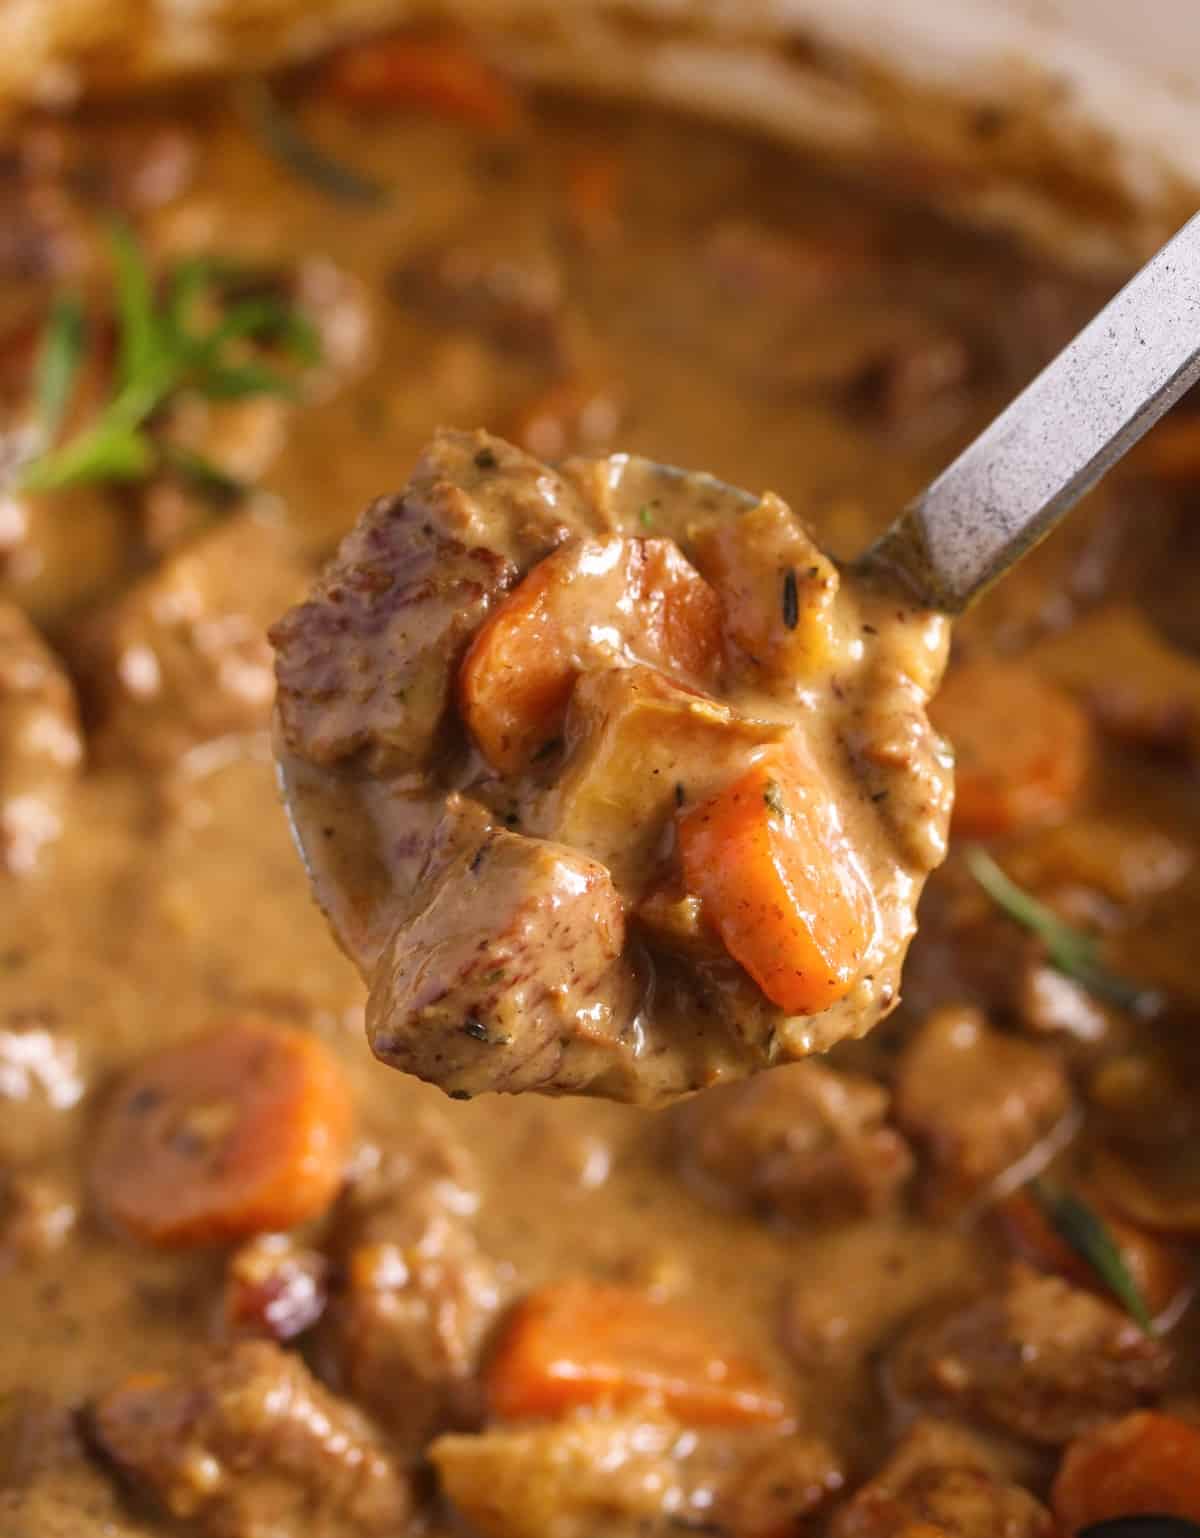 spoon lifting pieces of beef and carrots from a pot of stew.